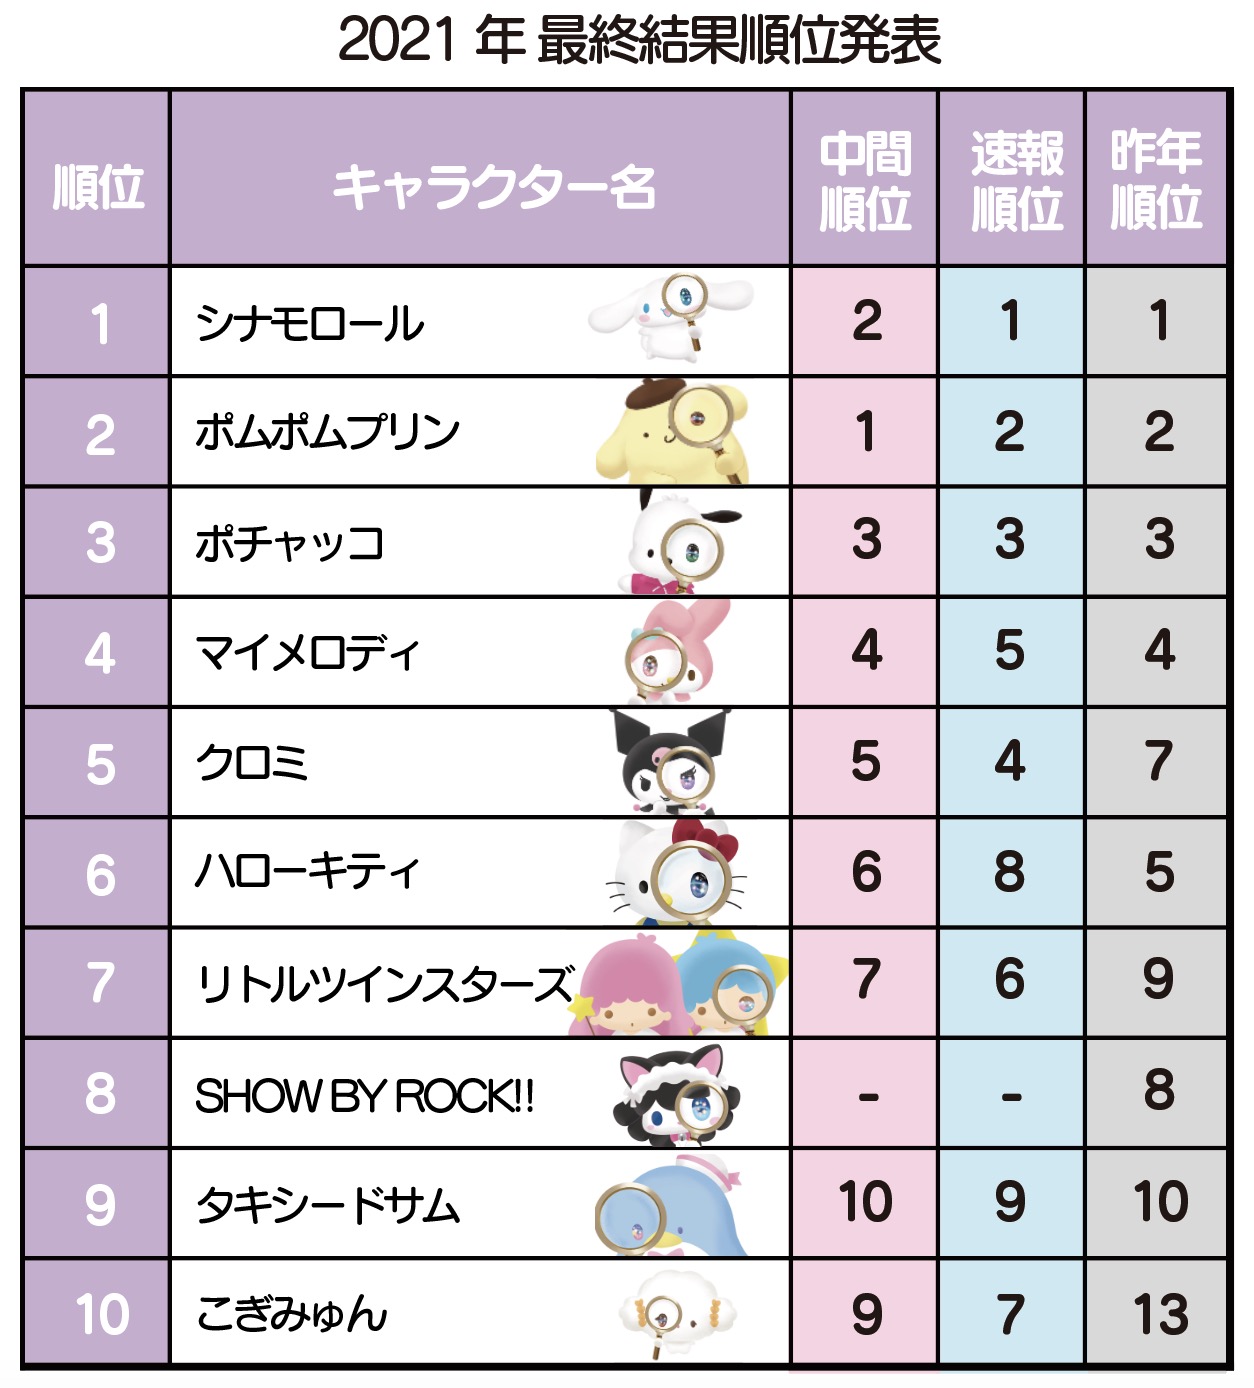 21 Sanrio Character Ranking Cinnamoroll Takes Home The Crown For The Second Year In A Row Moshi Moshi Nippon もしもしにっぽん